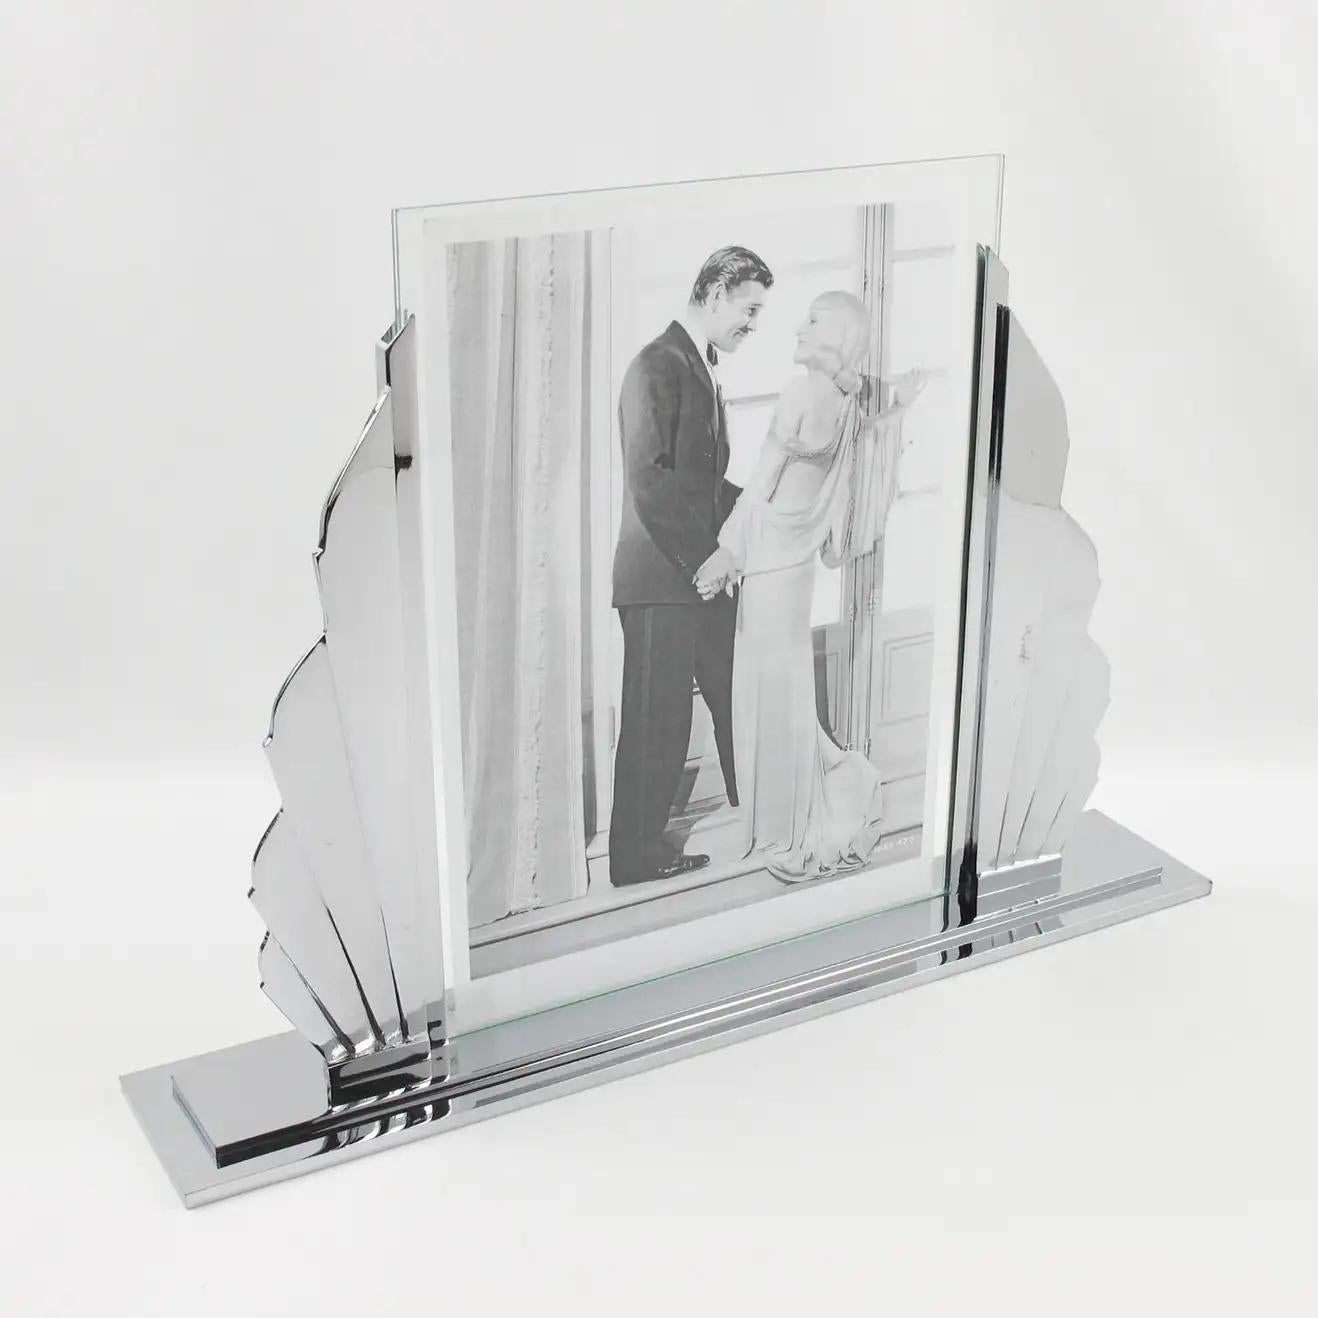 This impressive French Art Deco picture photo frame features a high-end quality build with polished chromed metal boasting a silhouetted stylized sunrise shape with four chrome rays on either side of the picture opening. The large and sturdy base is